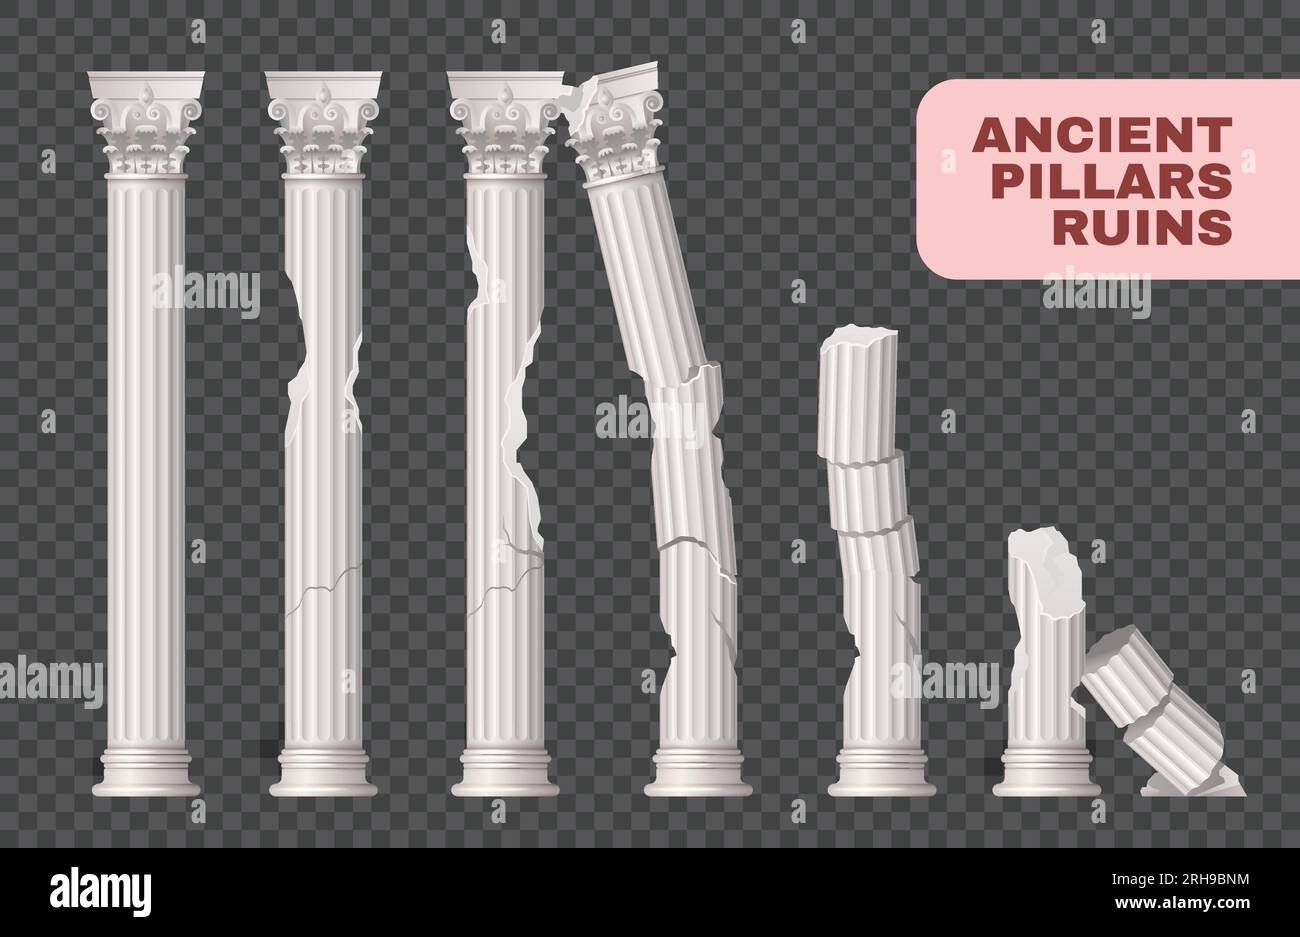 Pillars ruins ancient damaged set of isolated images with solid cracked ancient columns on transparent background vector illustration Stock Vector